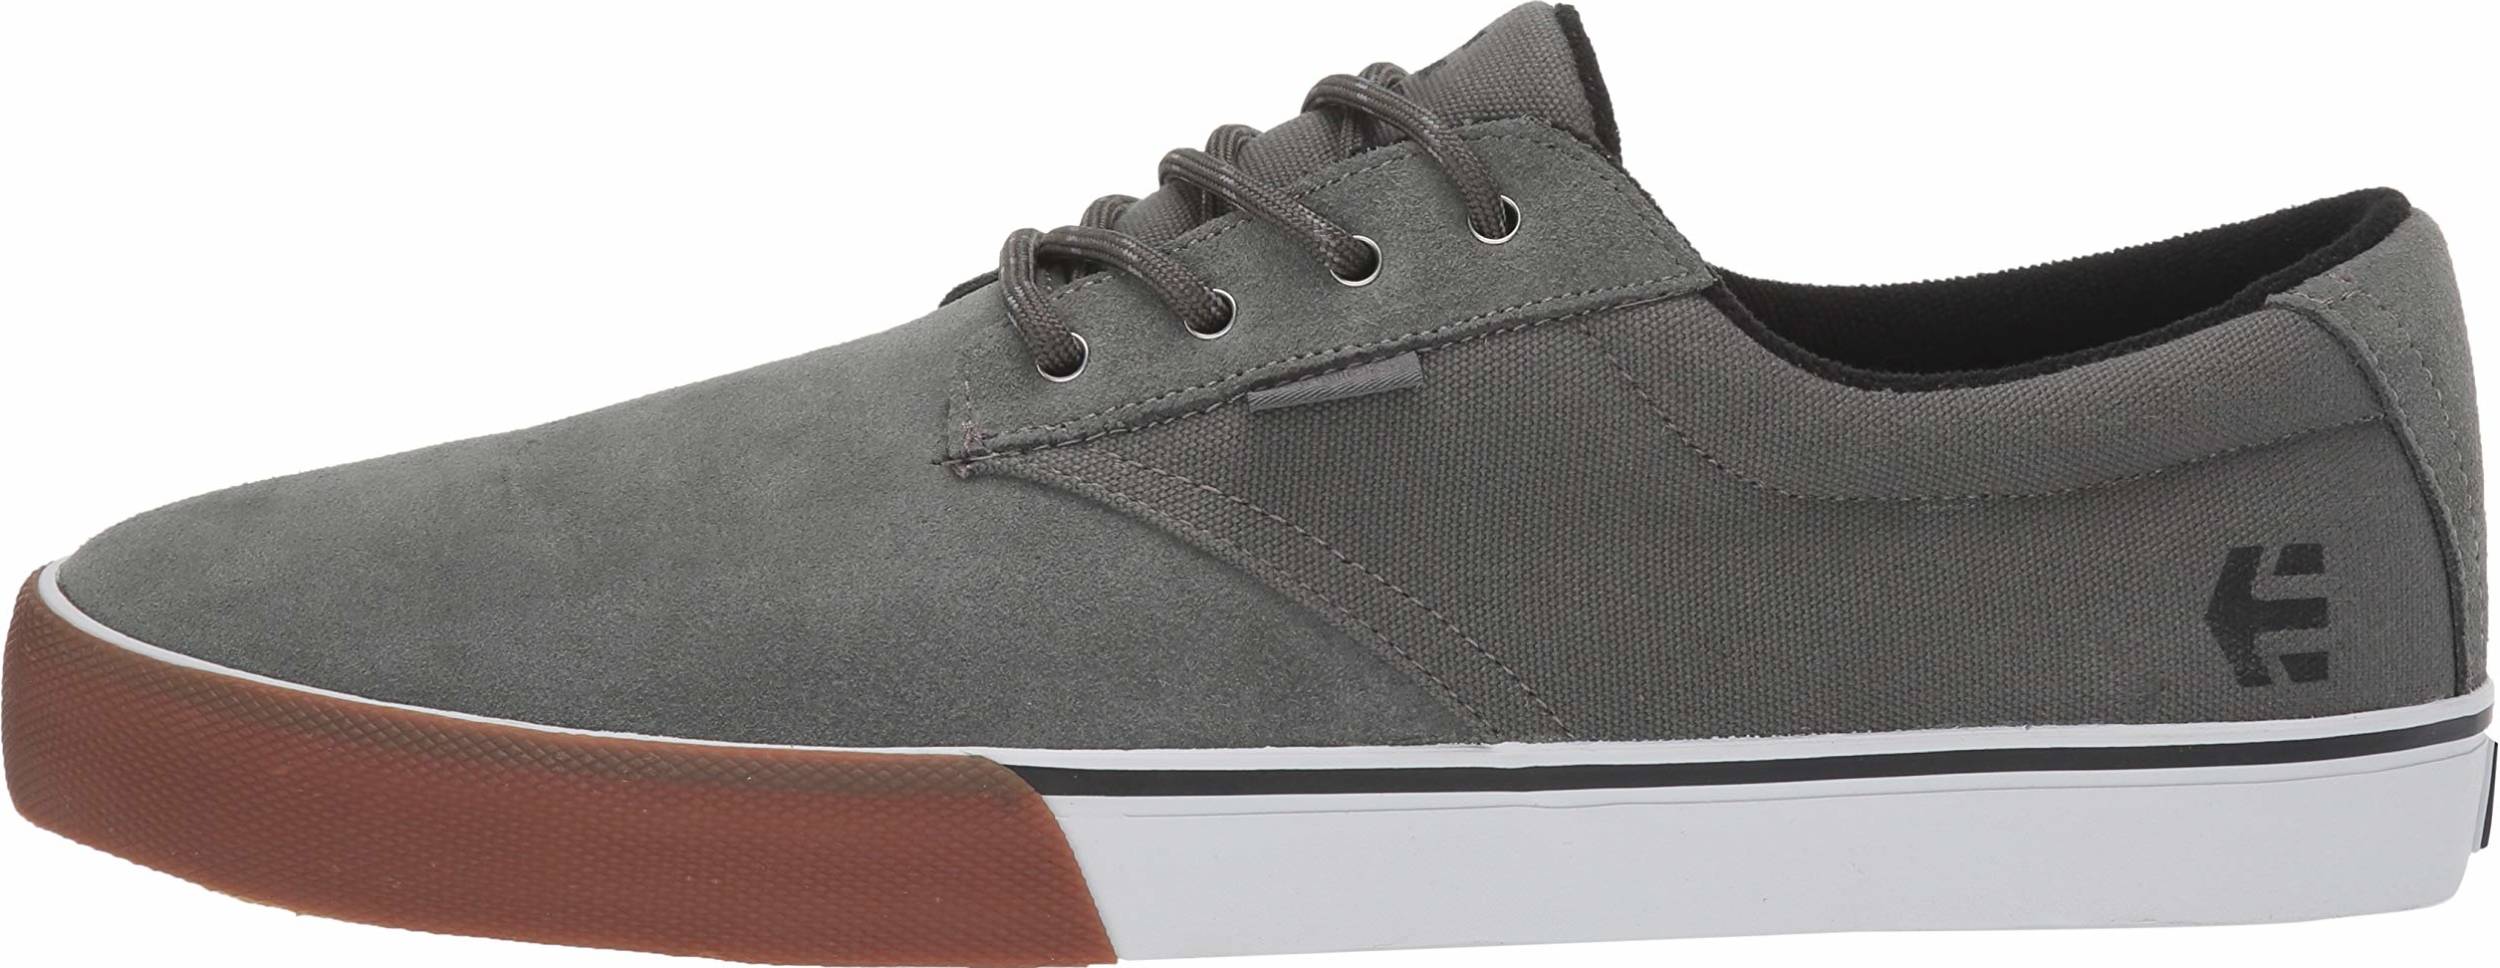 Save 46% on Etnies Eco Sneakers (4 